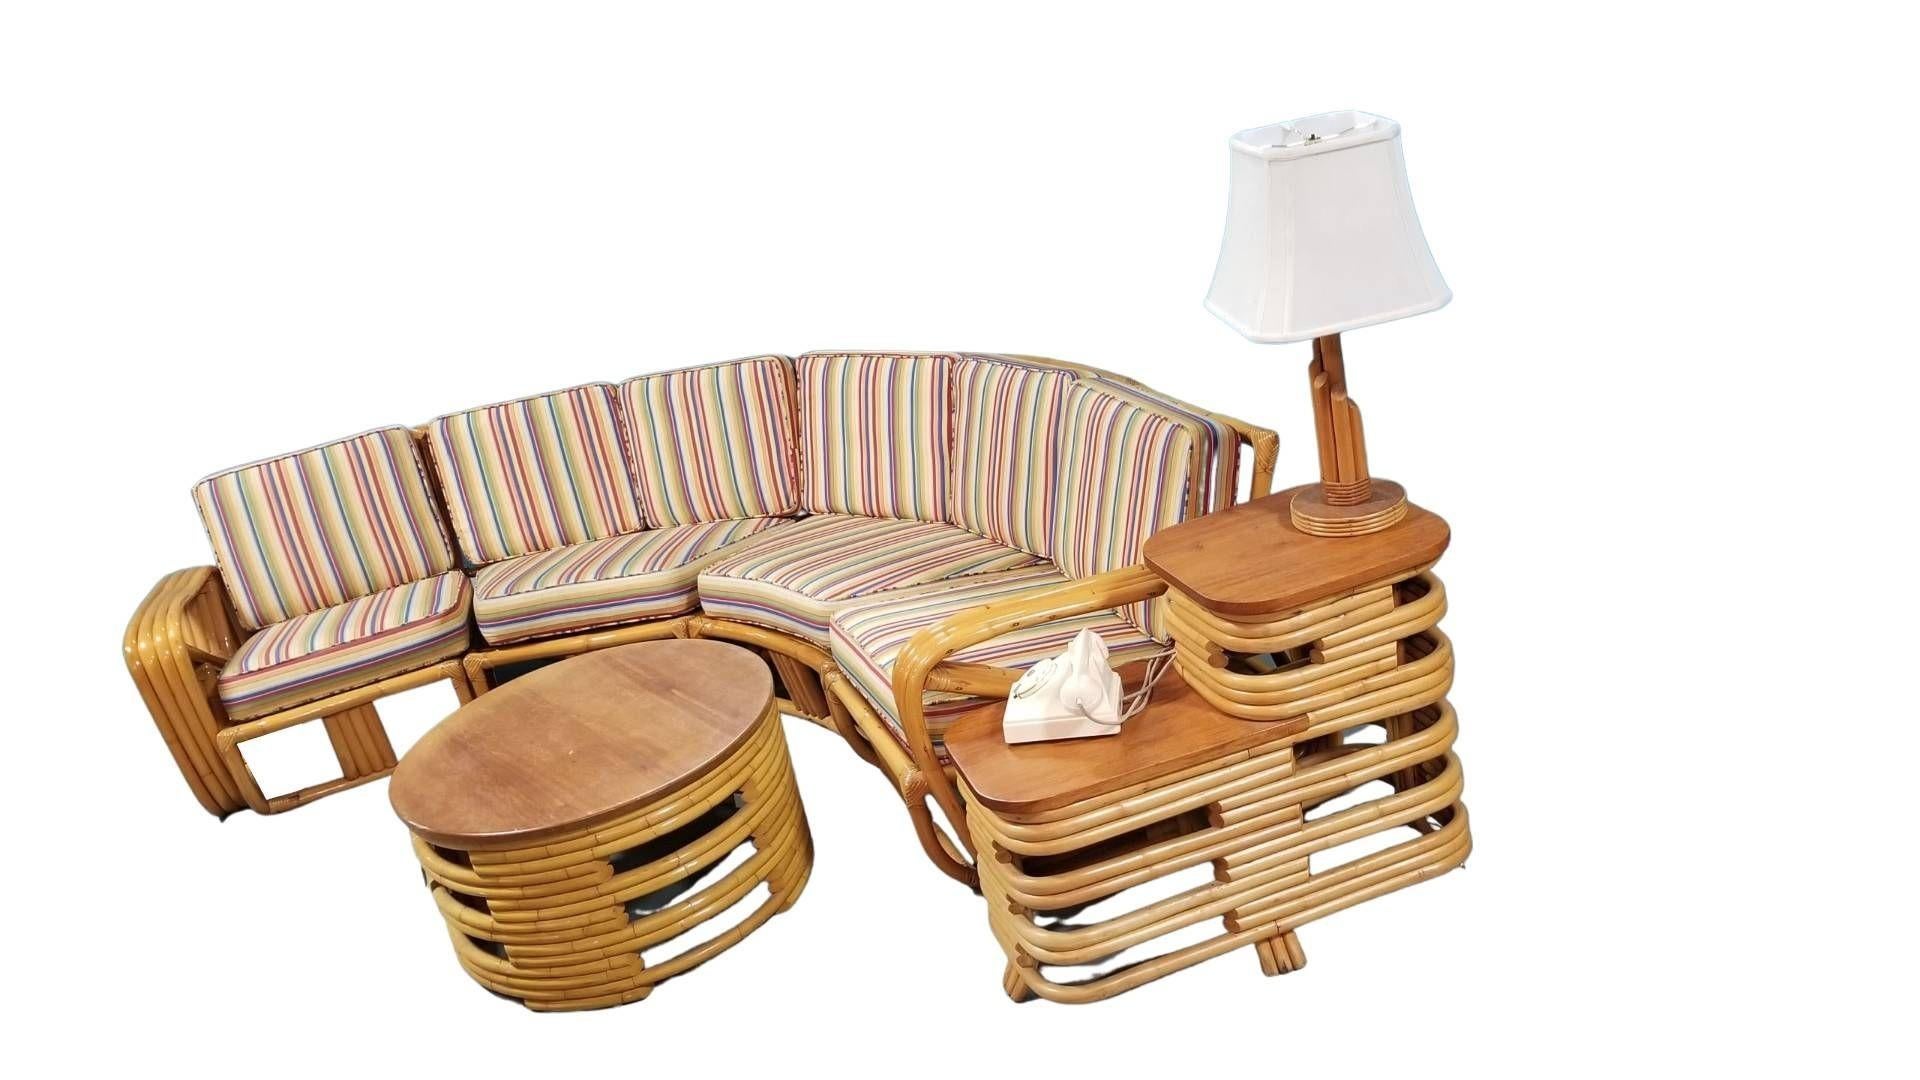 Mid-Century restored rattan living room set featuring a 4-piece sectional corner sofa with square pretzel arms, a round coffee table, and a two-tiered side table with included Bakelite telephone by Bell Systems

Lamp included, phone not